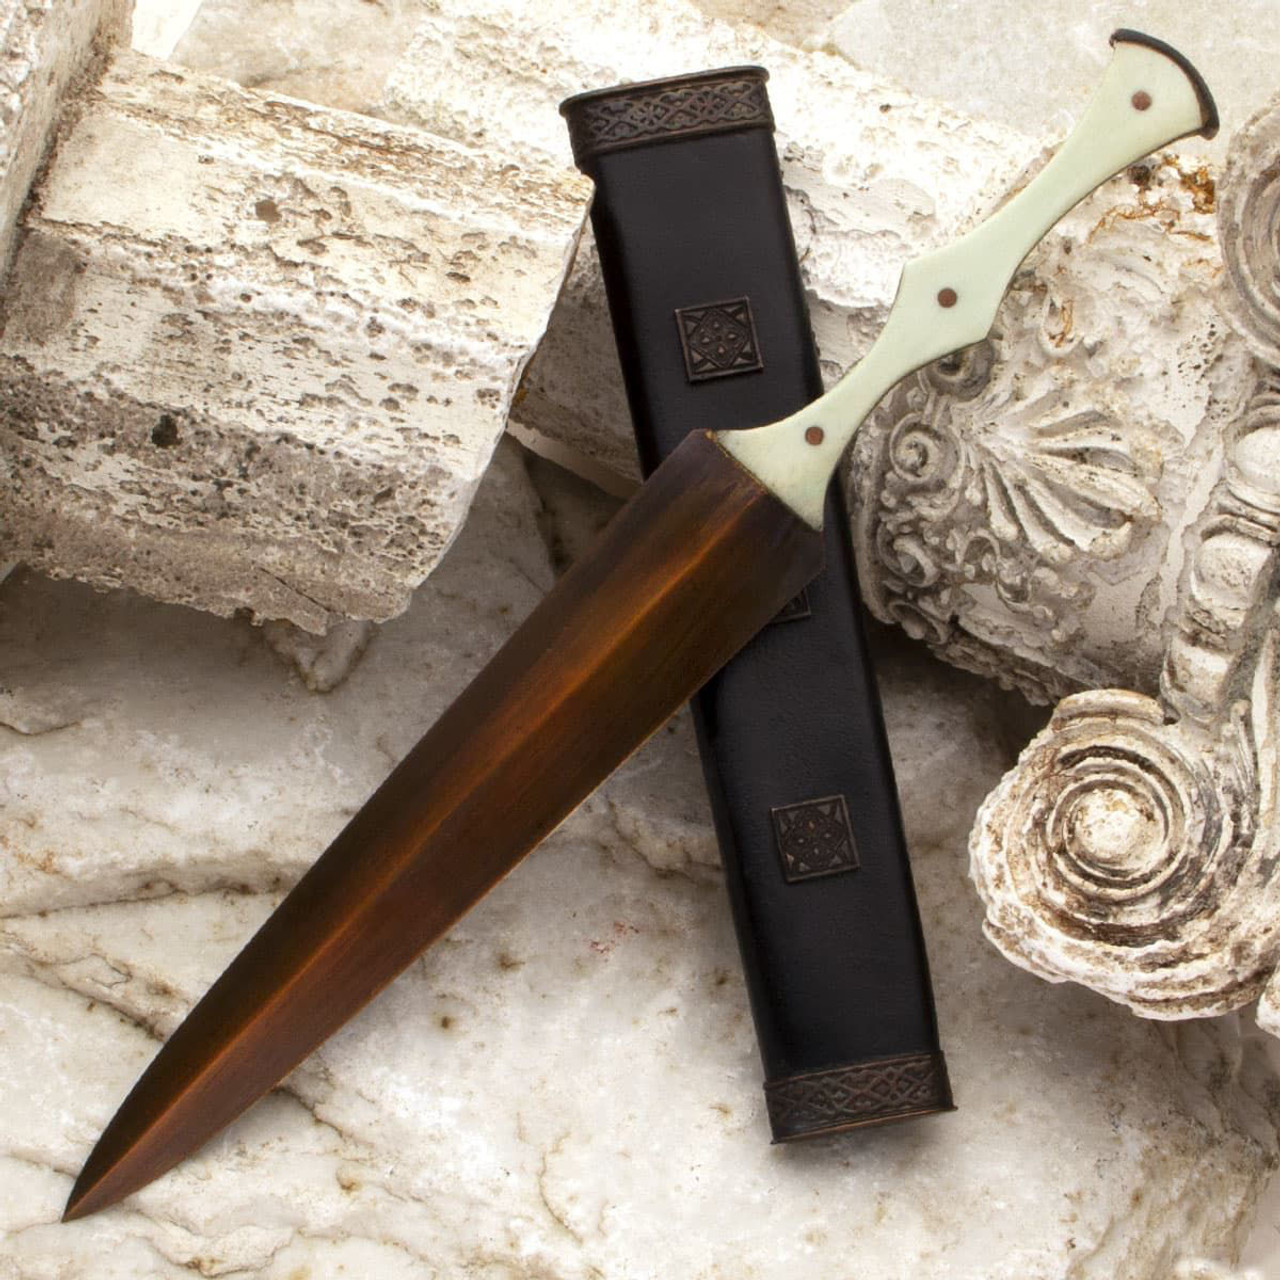 PeloponnesianÂ Dagger with bronze blade, scalloped bone scales and bronze embellished leather belt sheath